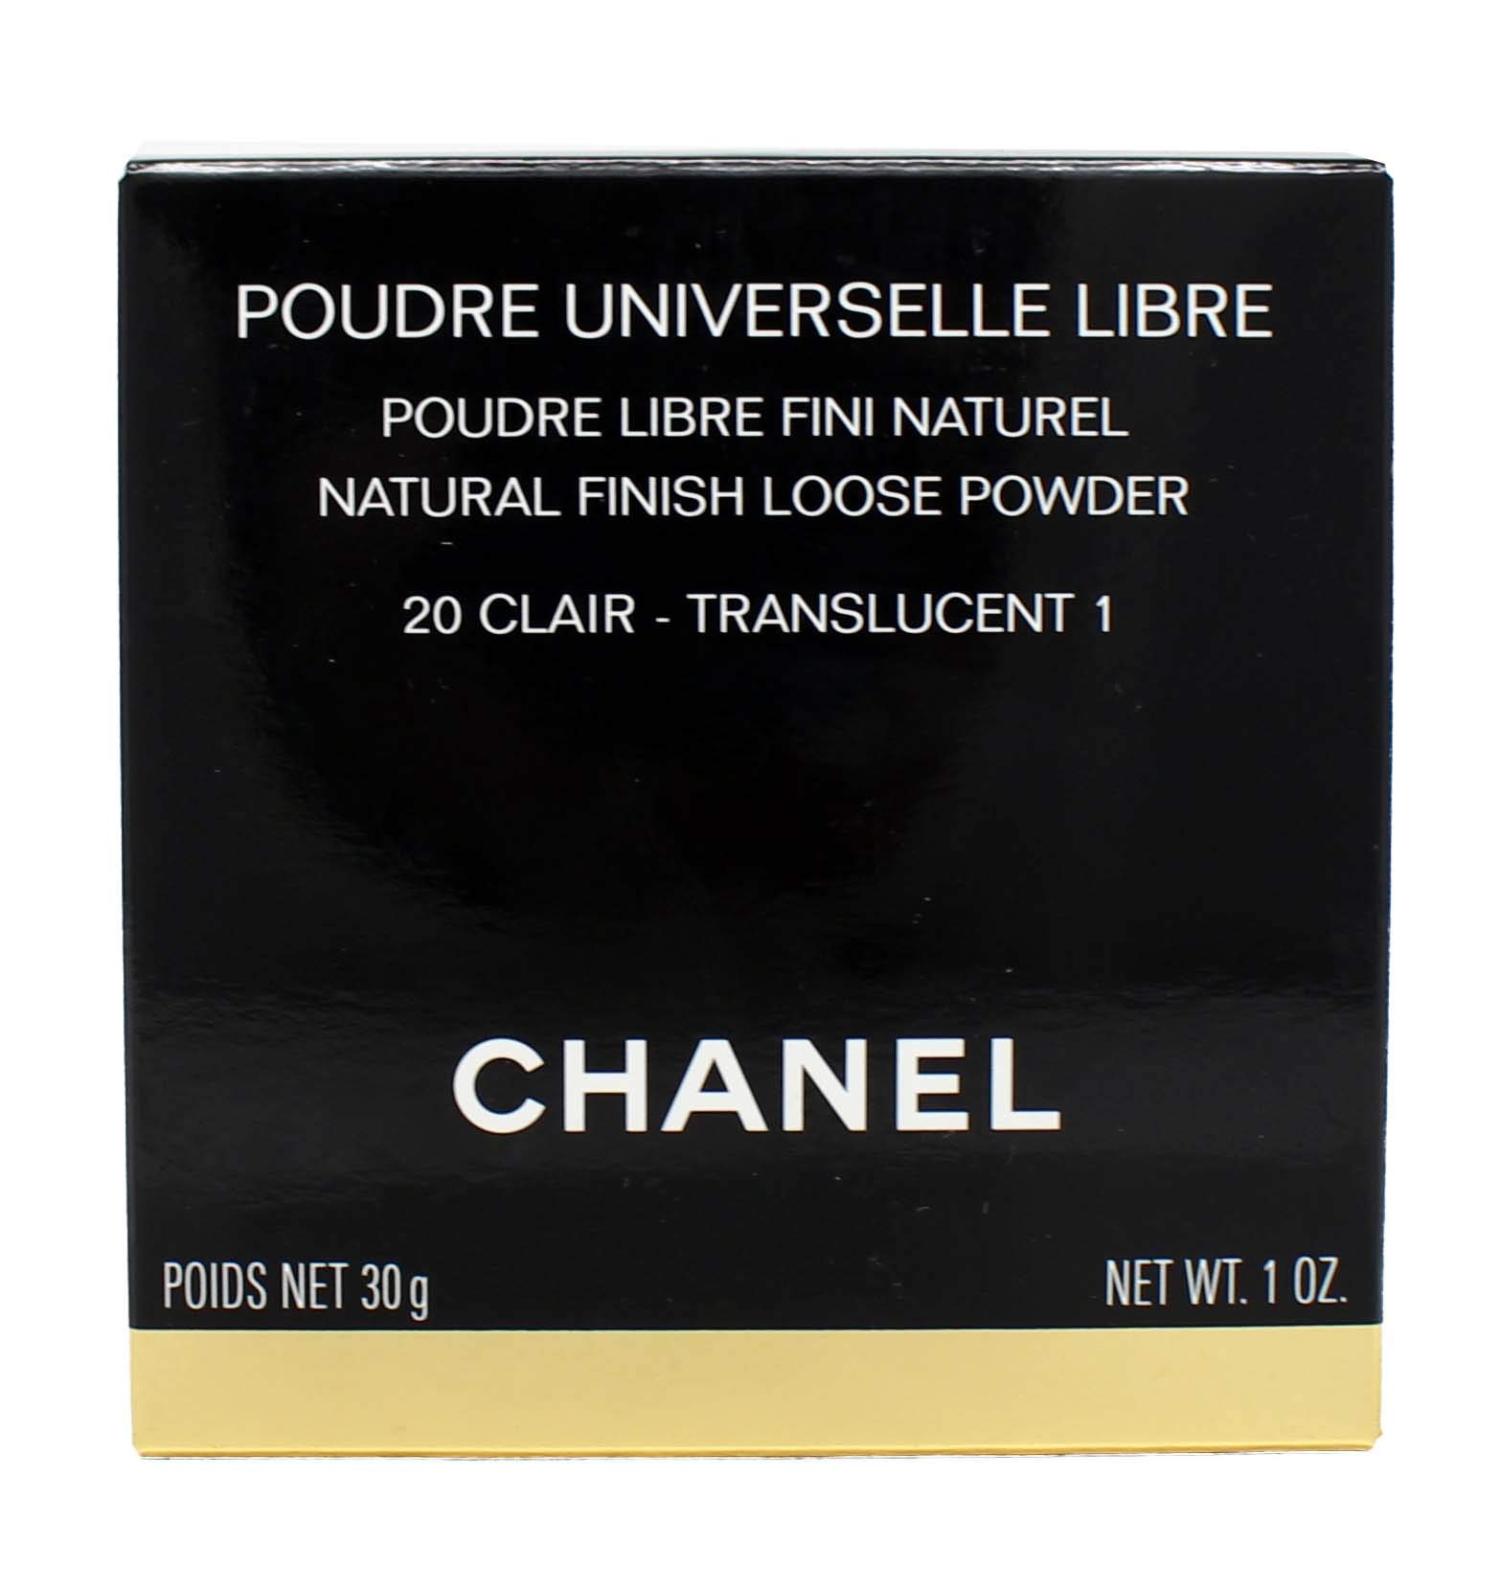 Chanel Poudre Universelle Libre Natural Finish Loose Powder 20 Clair Translucent 1 Ounce